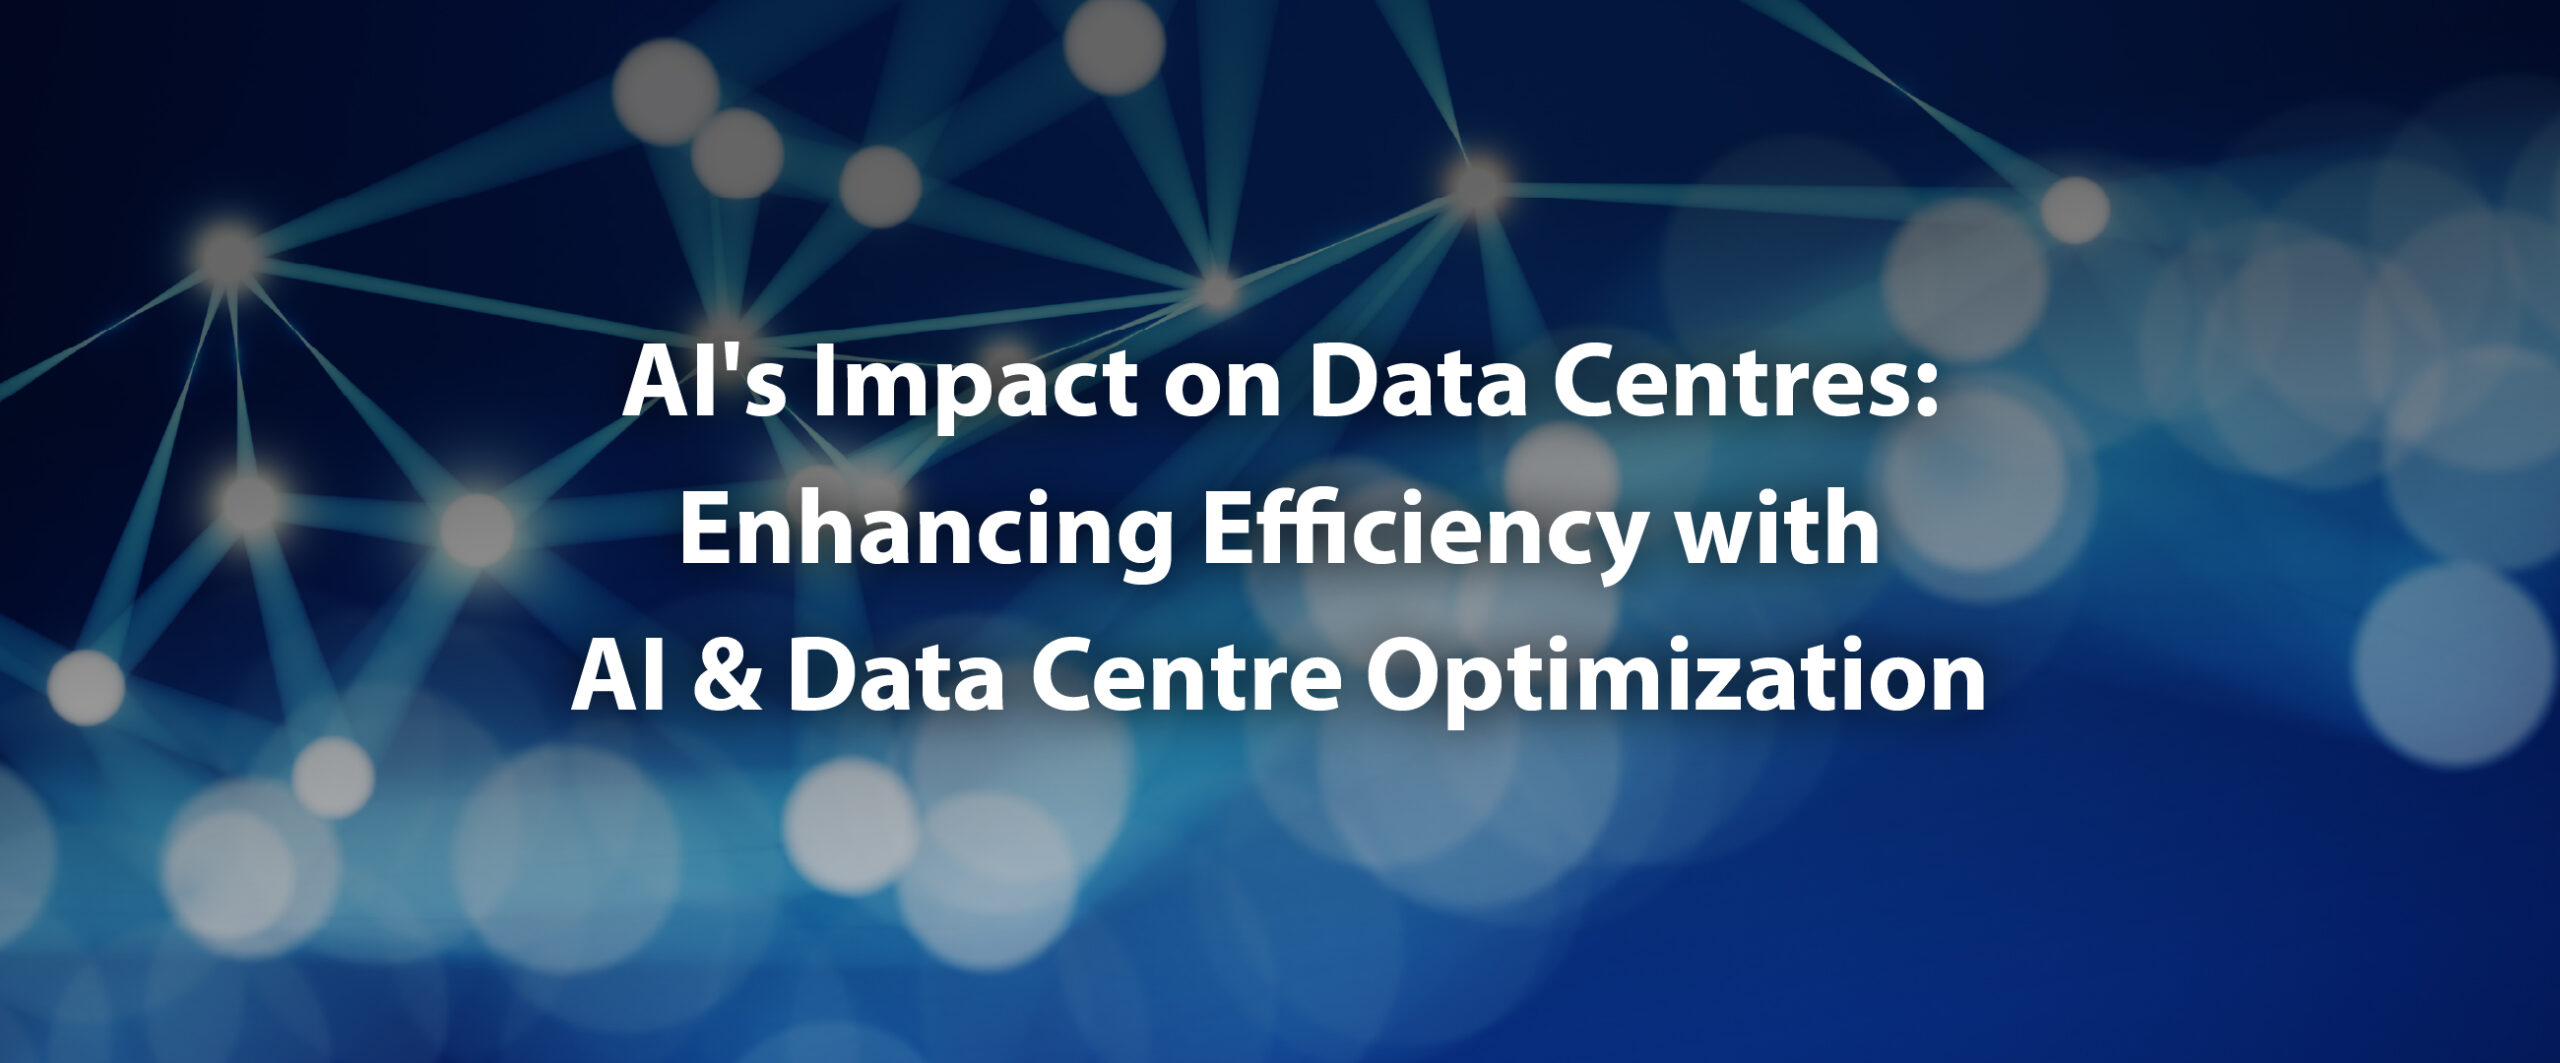 Cover image for the article on AI's Impact on Data Centers: Enhancing Efficiency with AI & Data Center Optimization